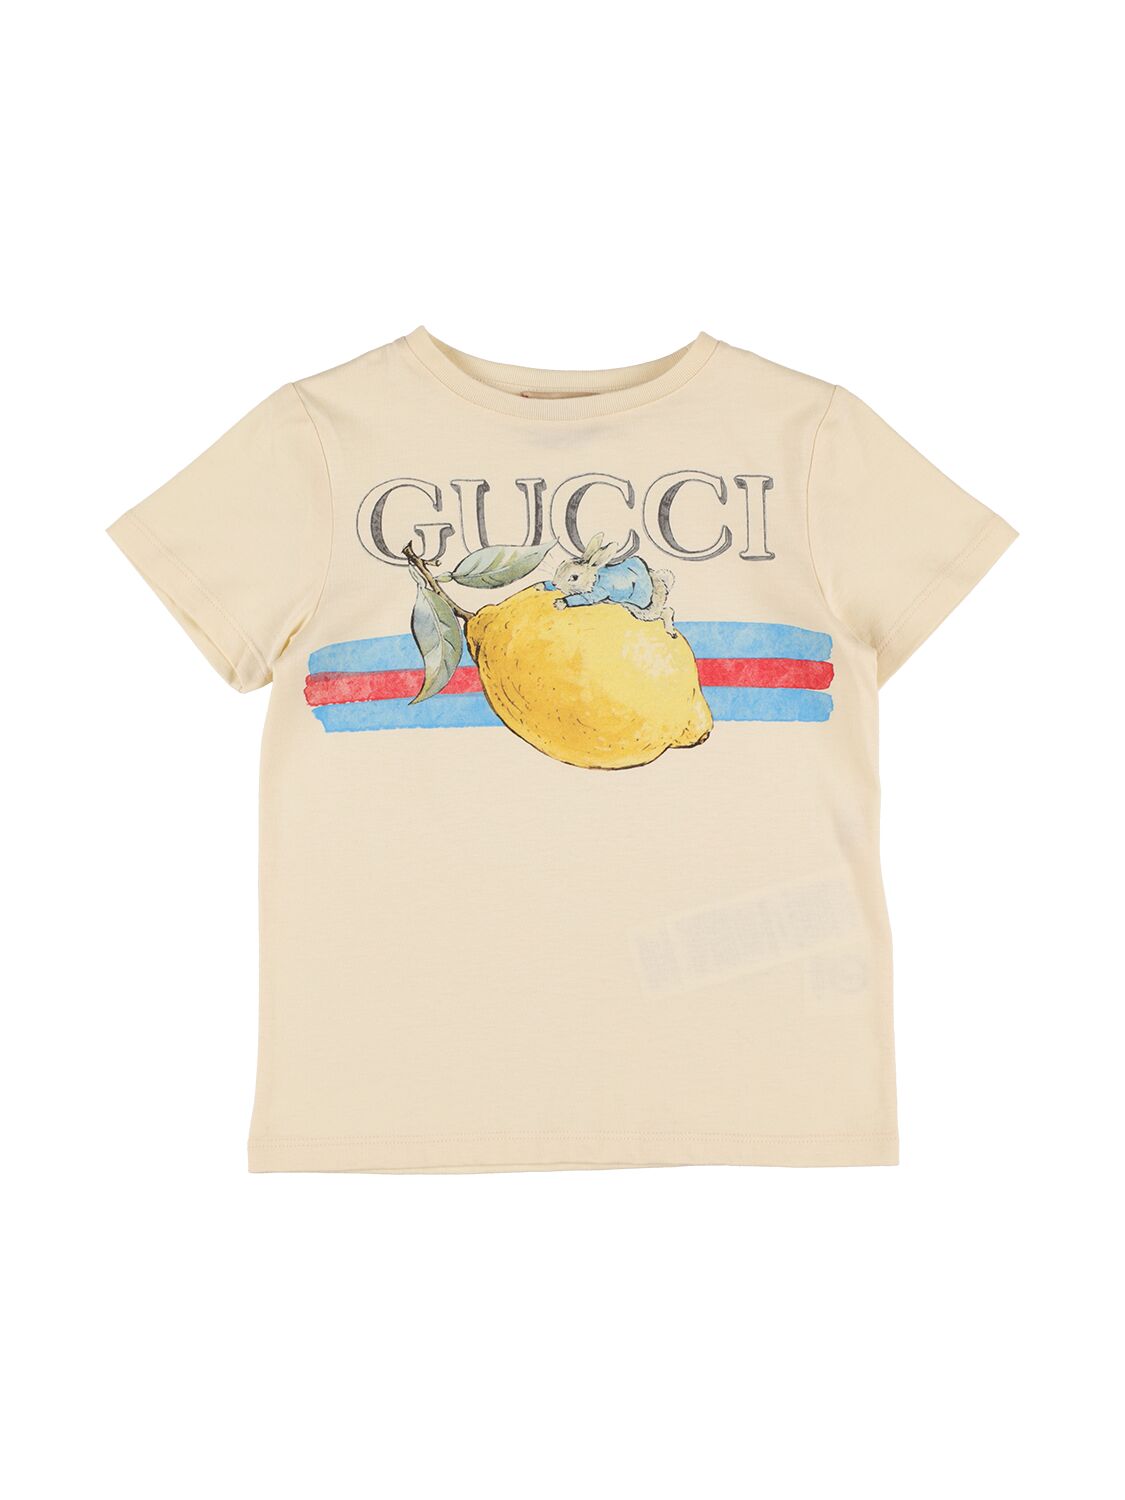 Gucci Kids' Peter Rabbit Cotton Jersey T-shirt In Sunkissed,multi